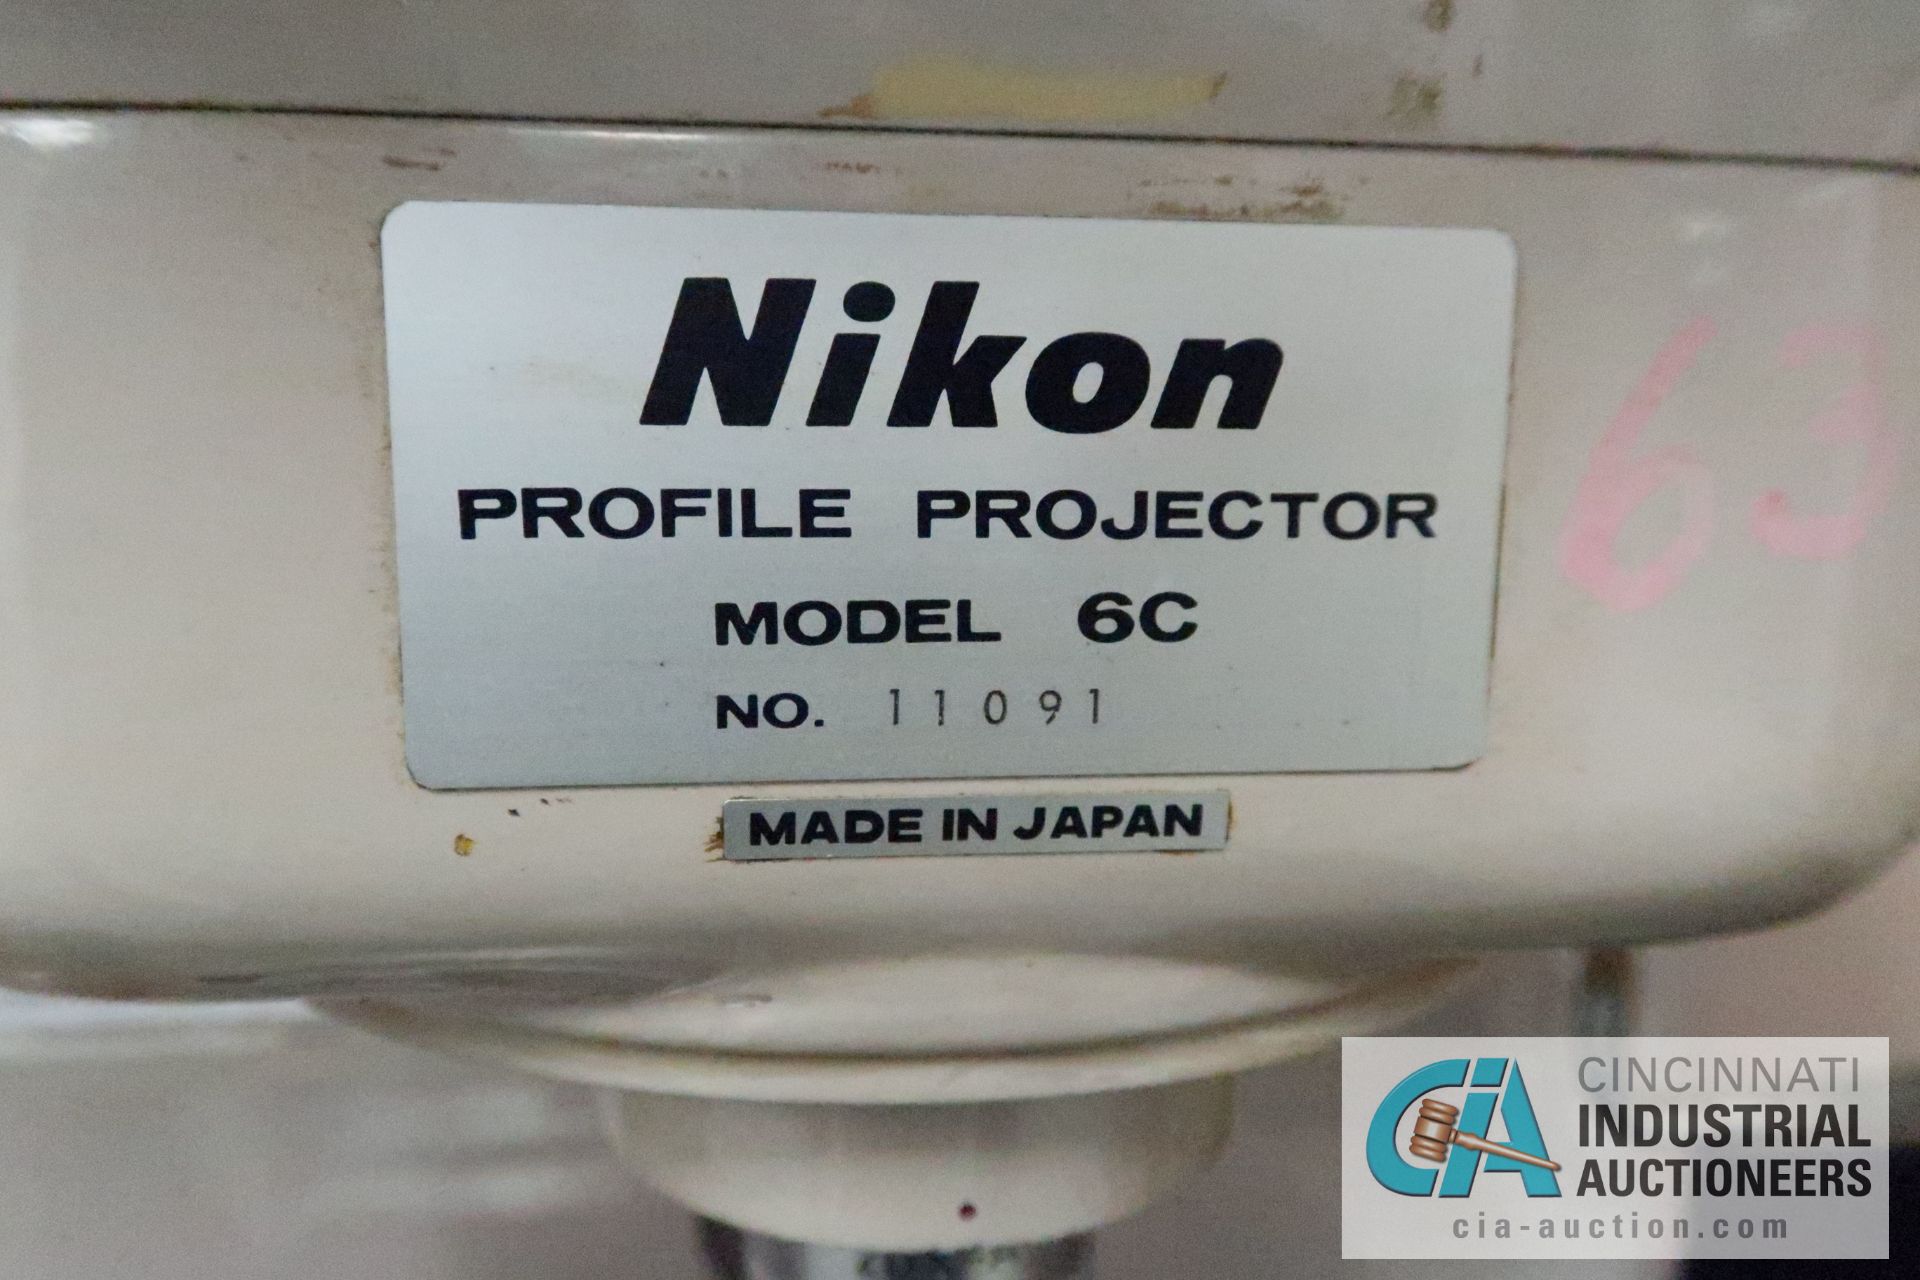 NIKON MODEL 6C PROFILE PROJECTOR; S/N 11091, 11" SCREEN, 20X, 50X, AND 10X LENS - Image 6 of 6